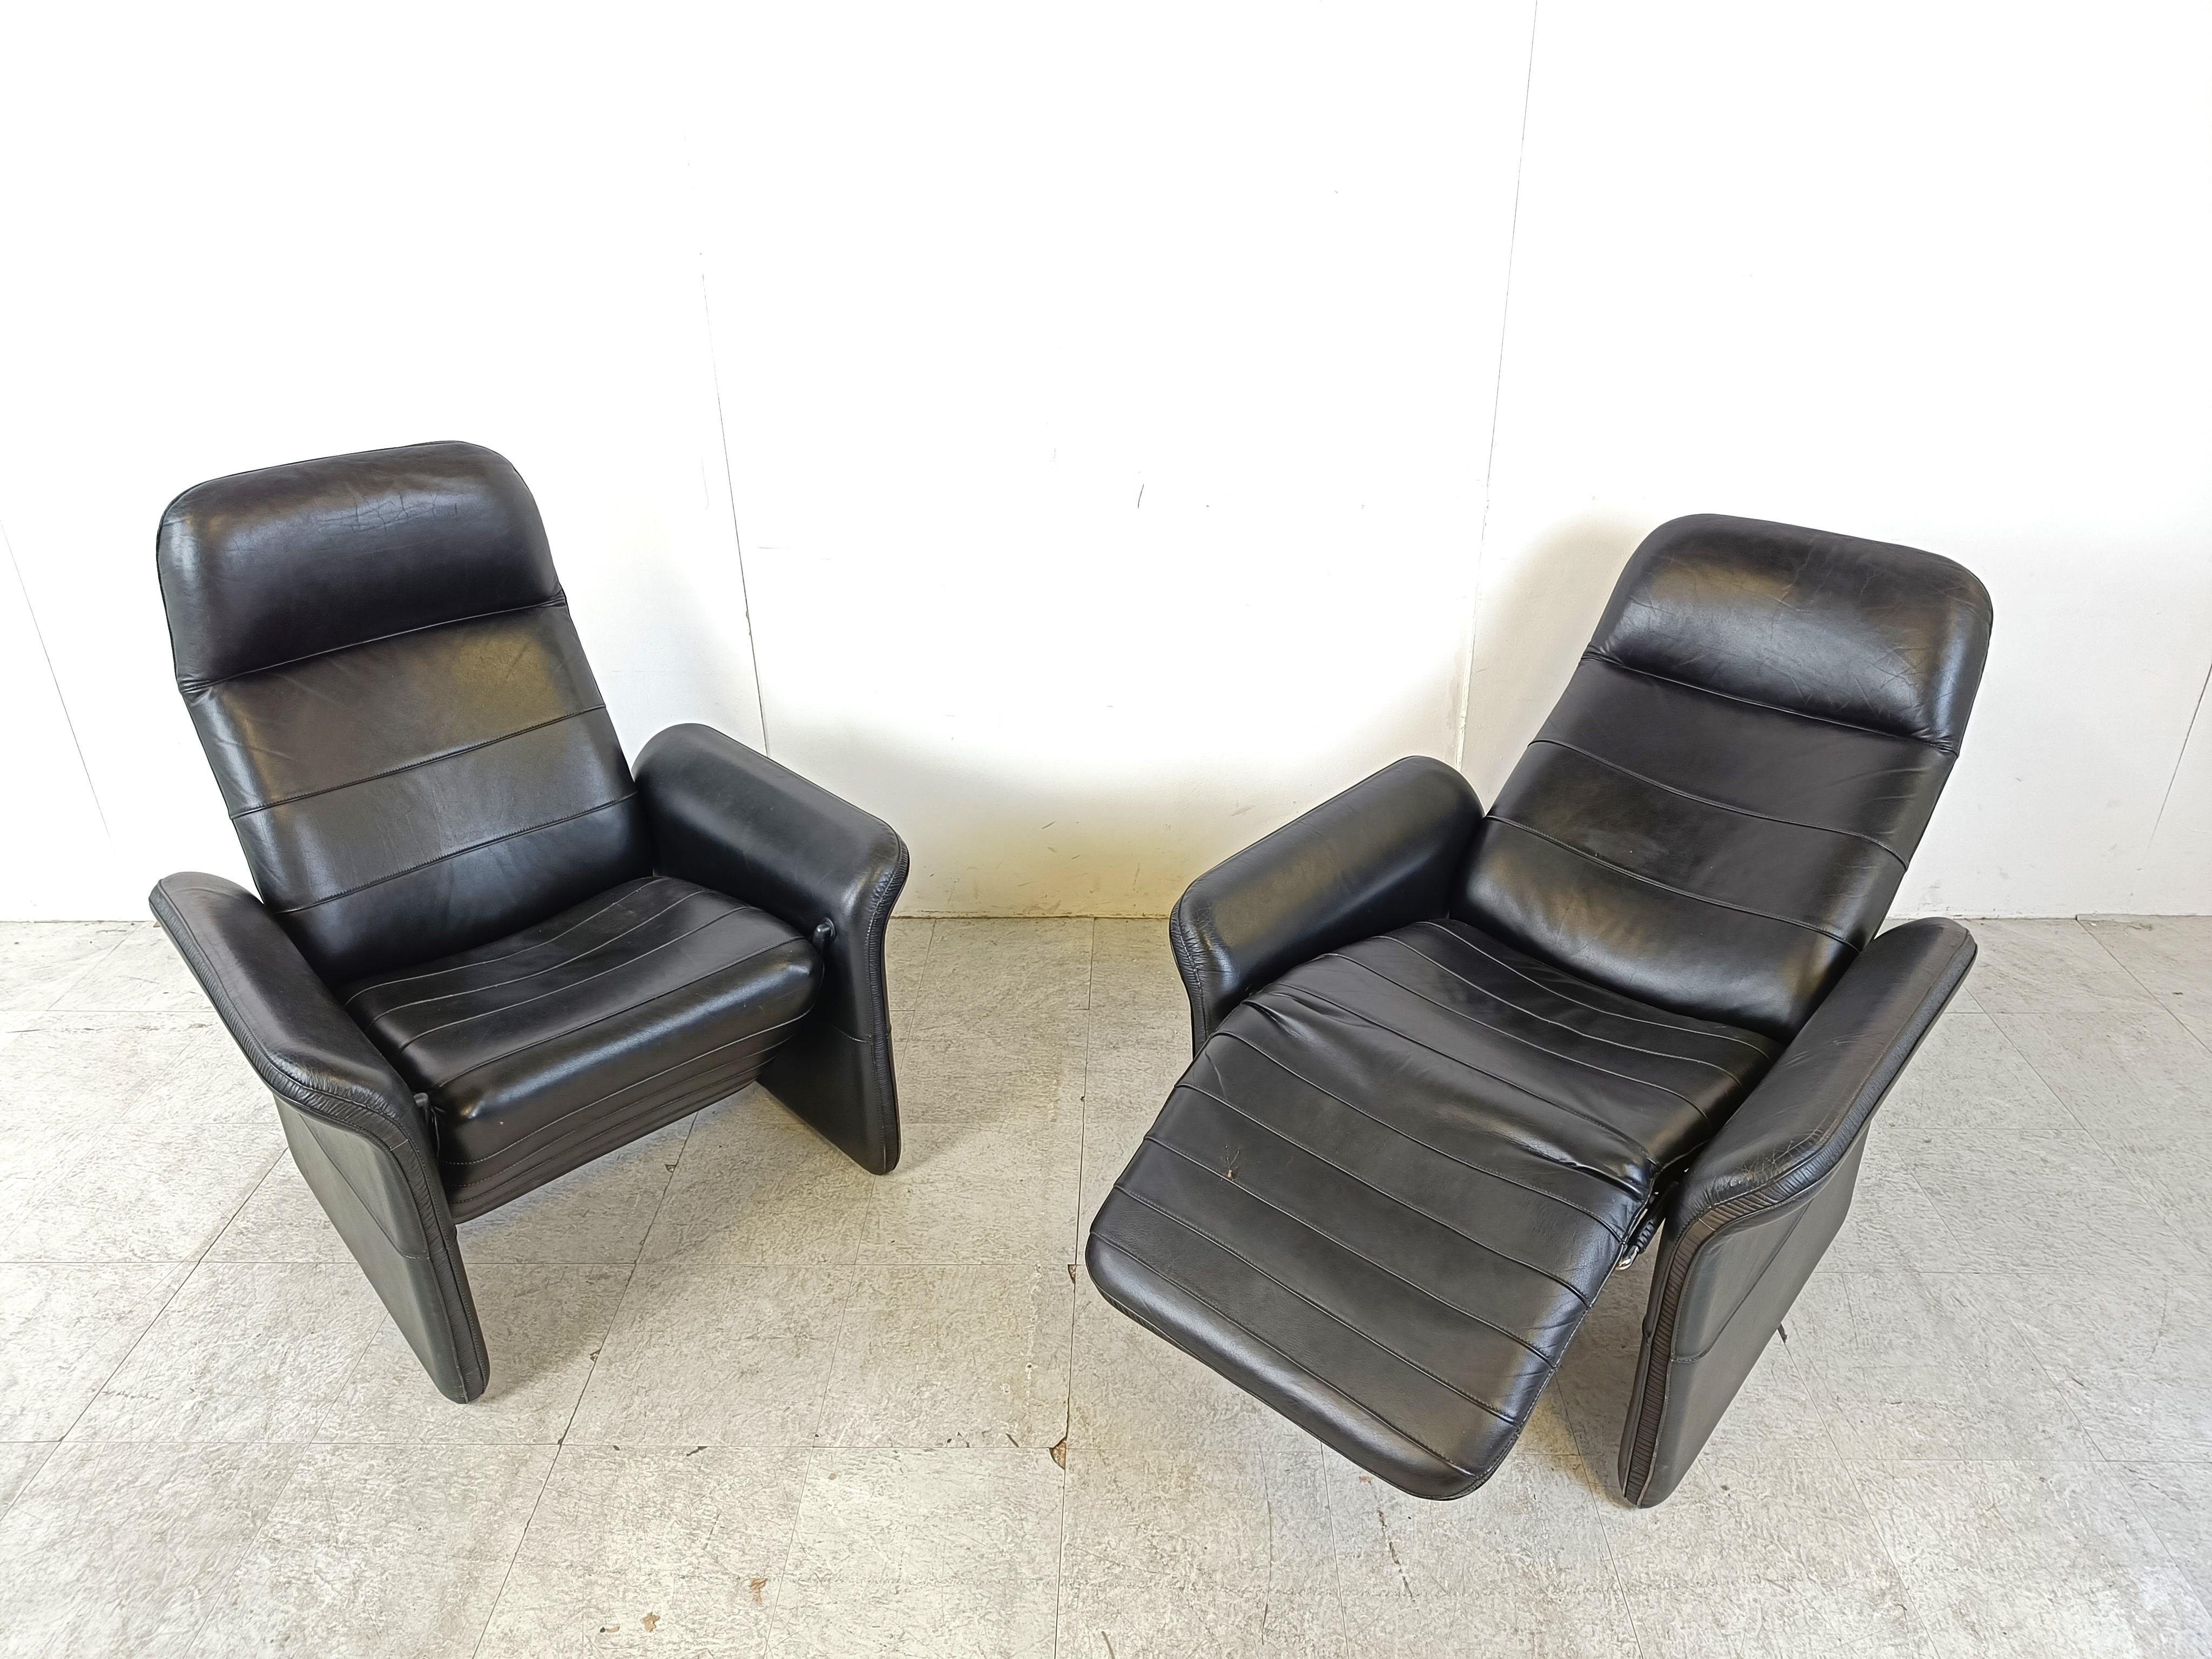 Mid century modern leather reclining armchairs in the manner of Desede's DS50.

Very comfortable chairs with a timeless design.

Very good condition

1970s - Switzerland

Dimensions:
Height: 100cm/39.37